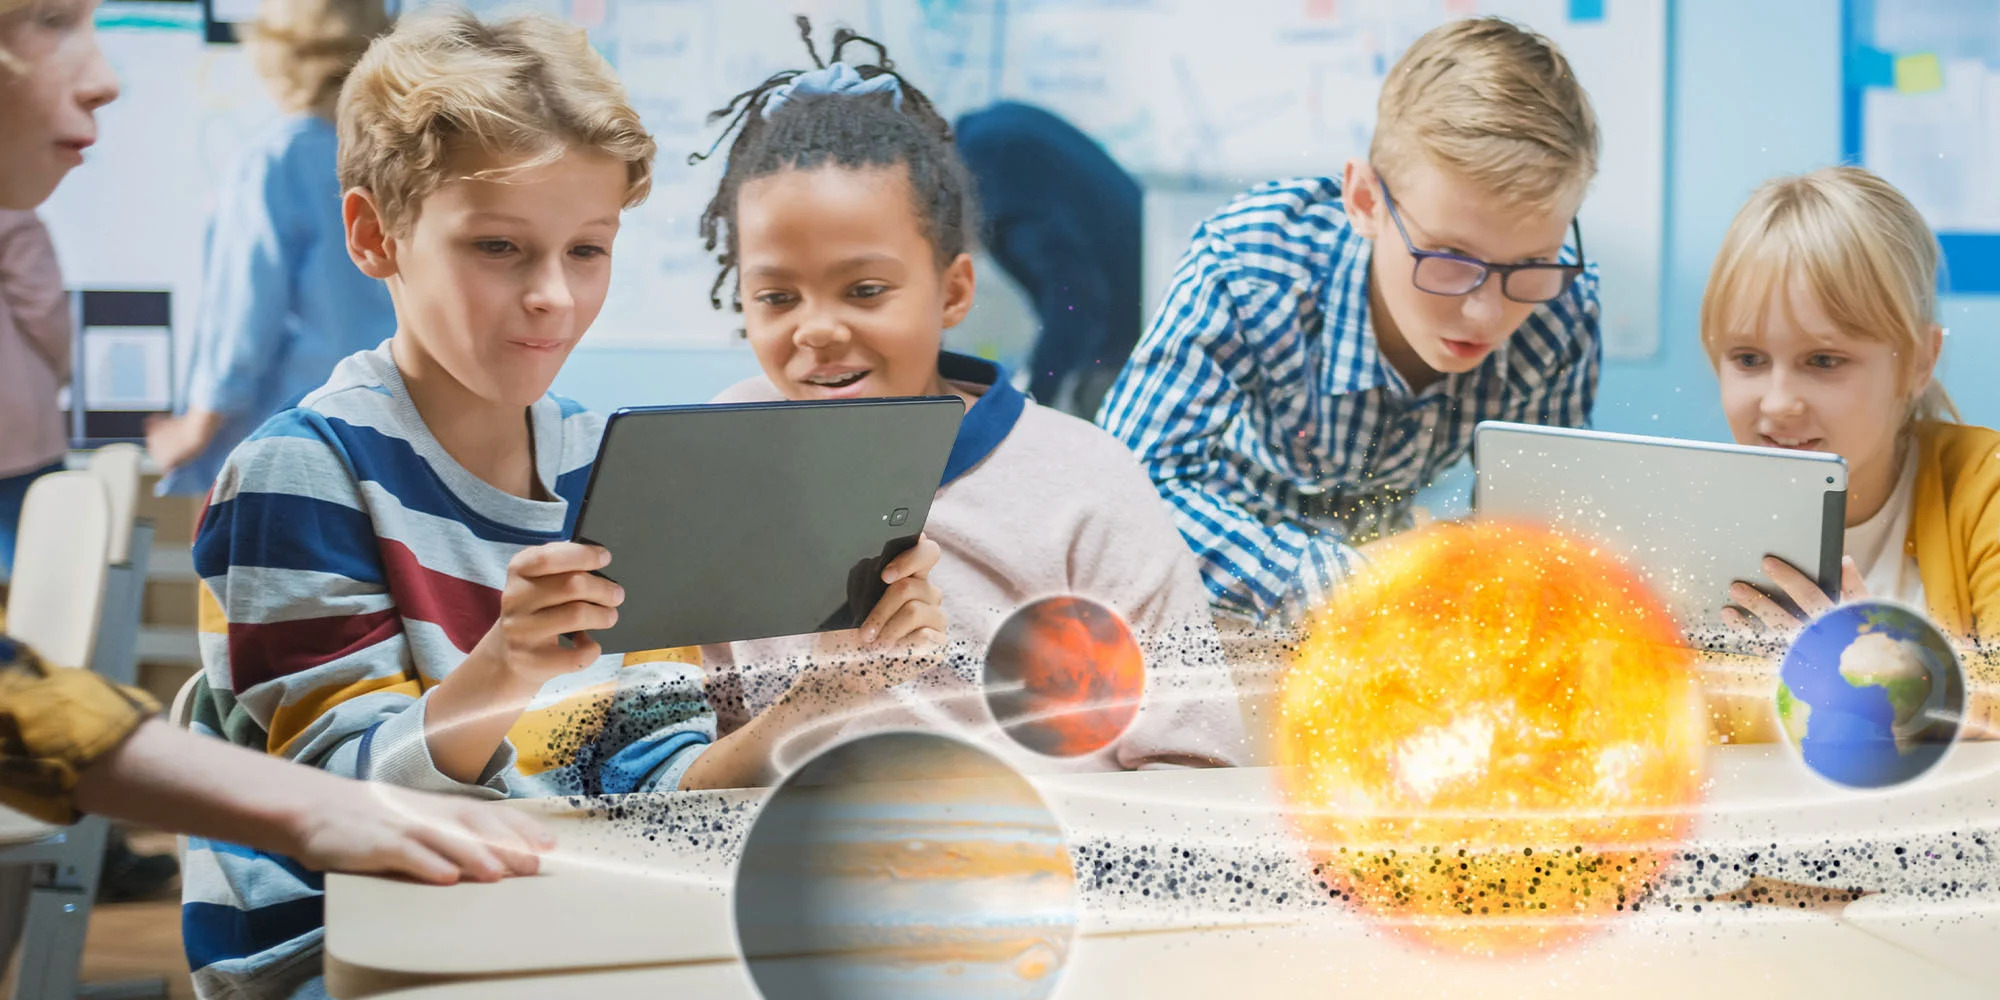 How Is Augmented Reality Used In Education